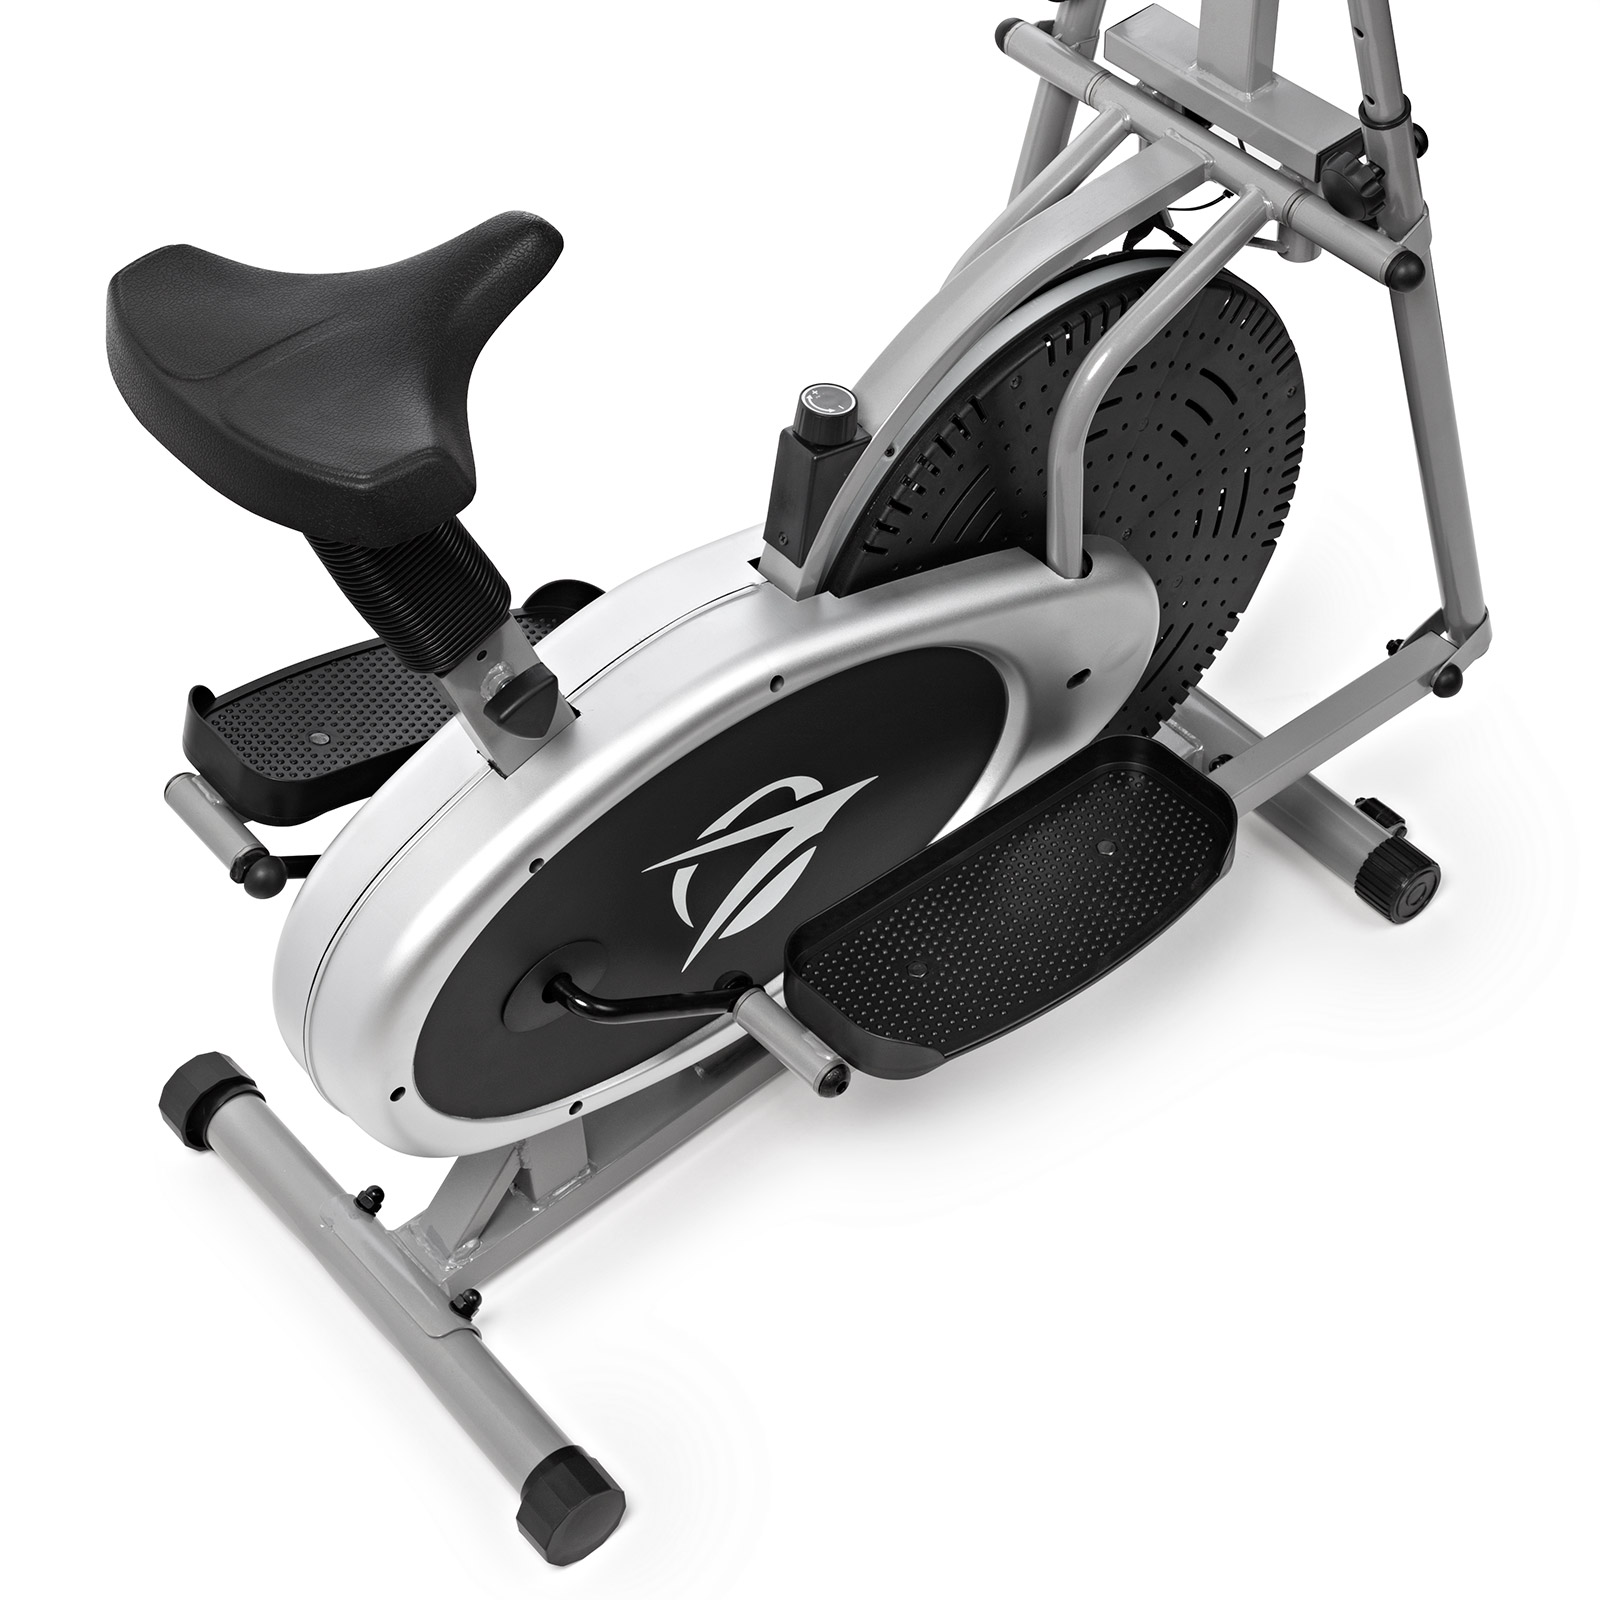 Plasma Fit Elliptical Machine Cross Trainer 2 in 1 Exercise Bike Cardio Fitness Home Gym Equipment - image 2 of 5